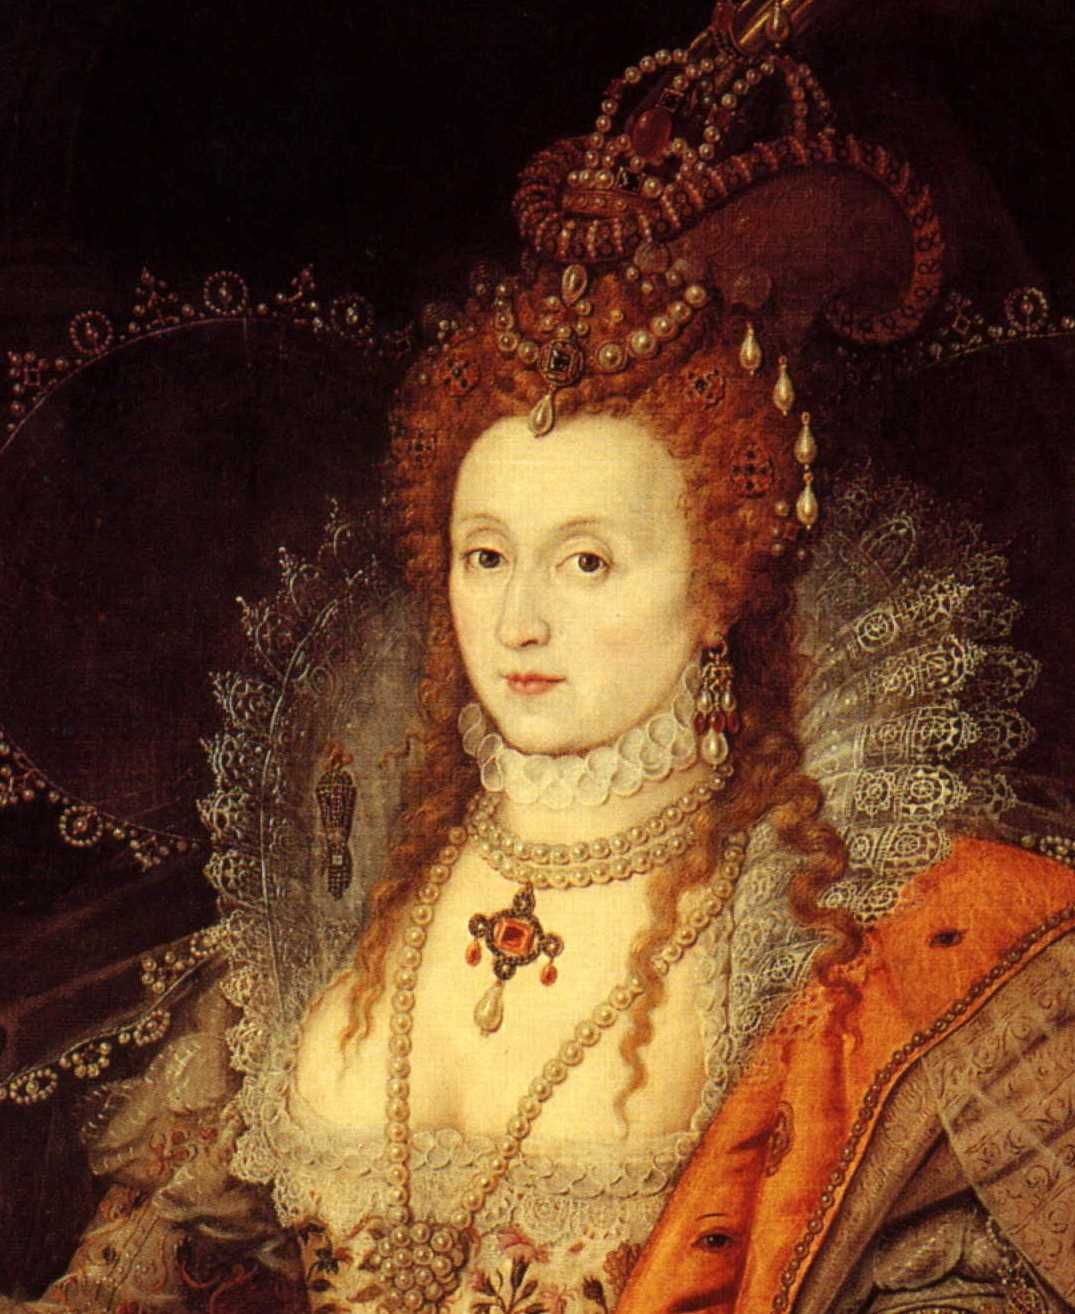 Wmrf On Twitter Queen Elizabeth I Was Given The Nickname Gloriana